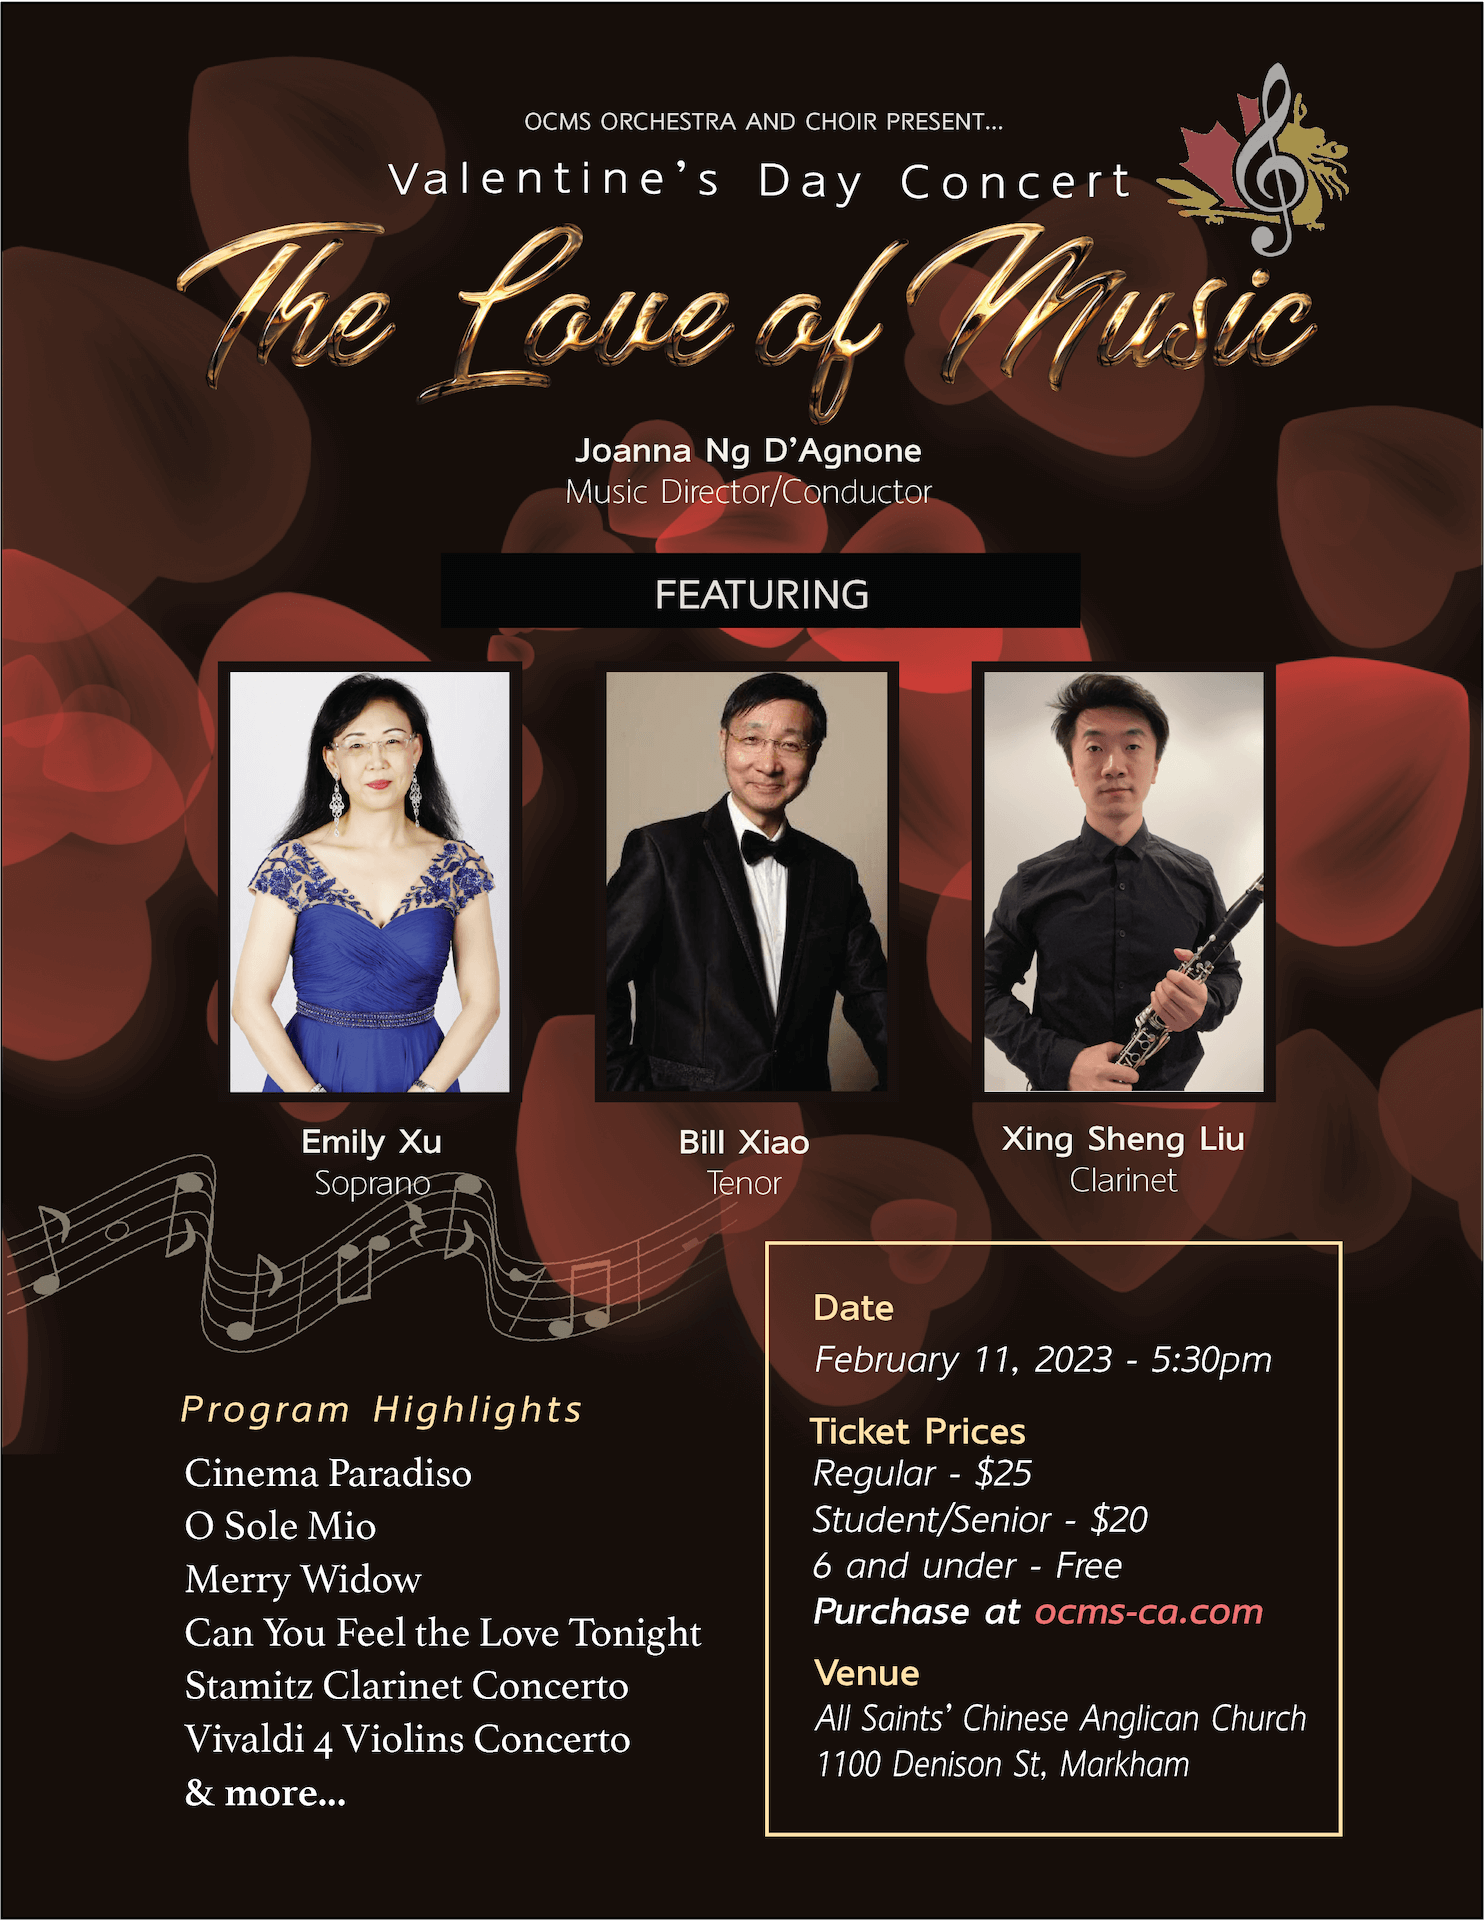 OCMS Presents Valentine's Day Concert - The Love of Music - Saturday, February 11, 2023